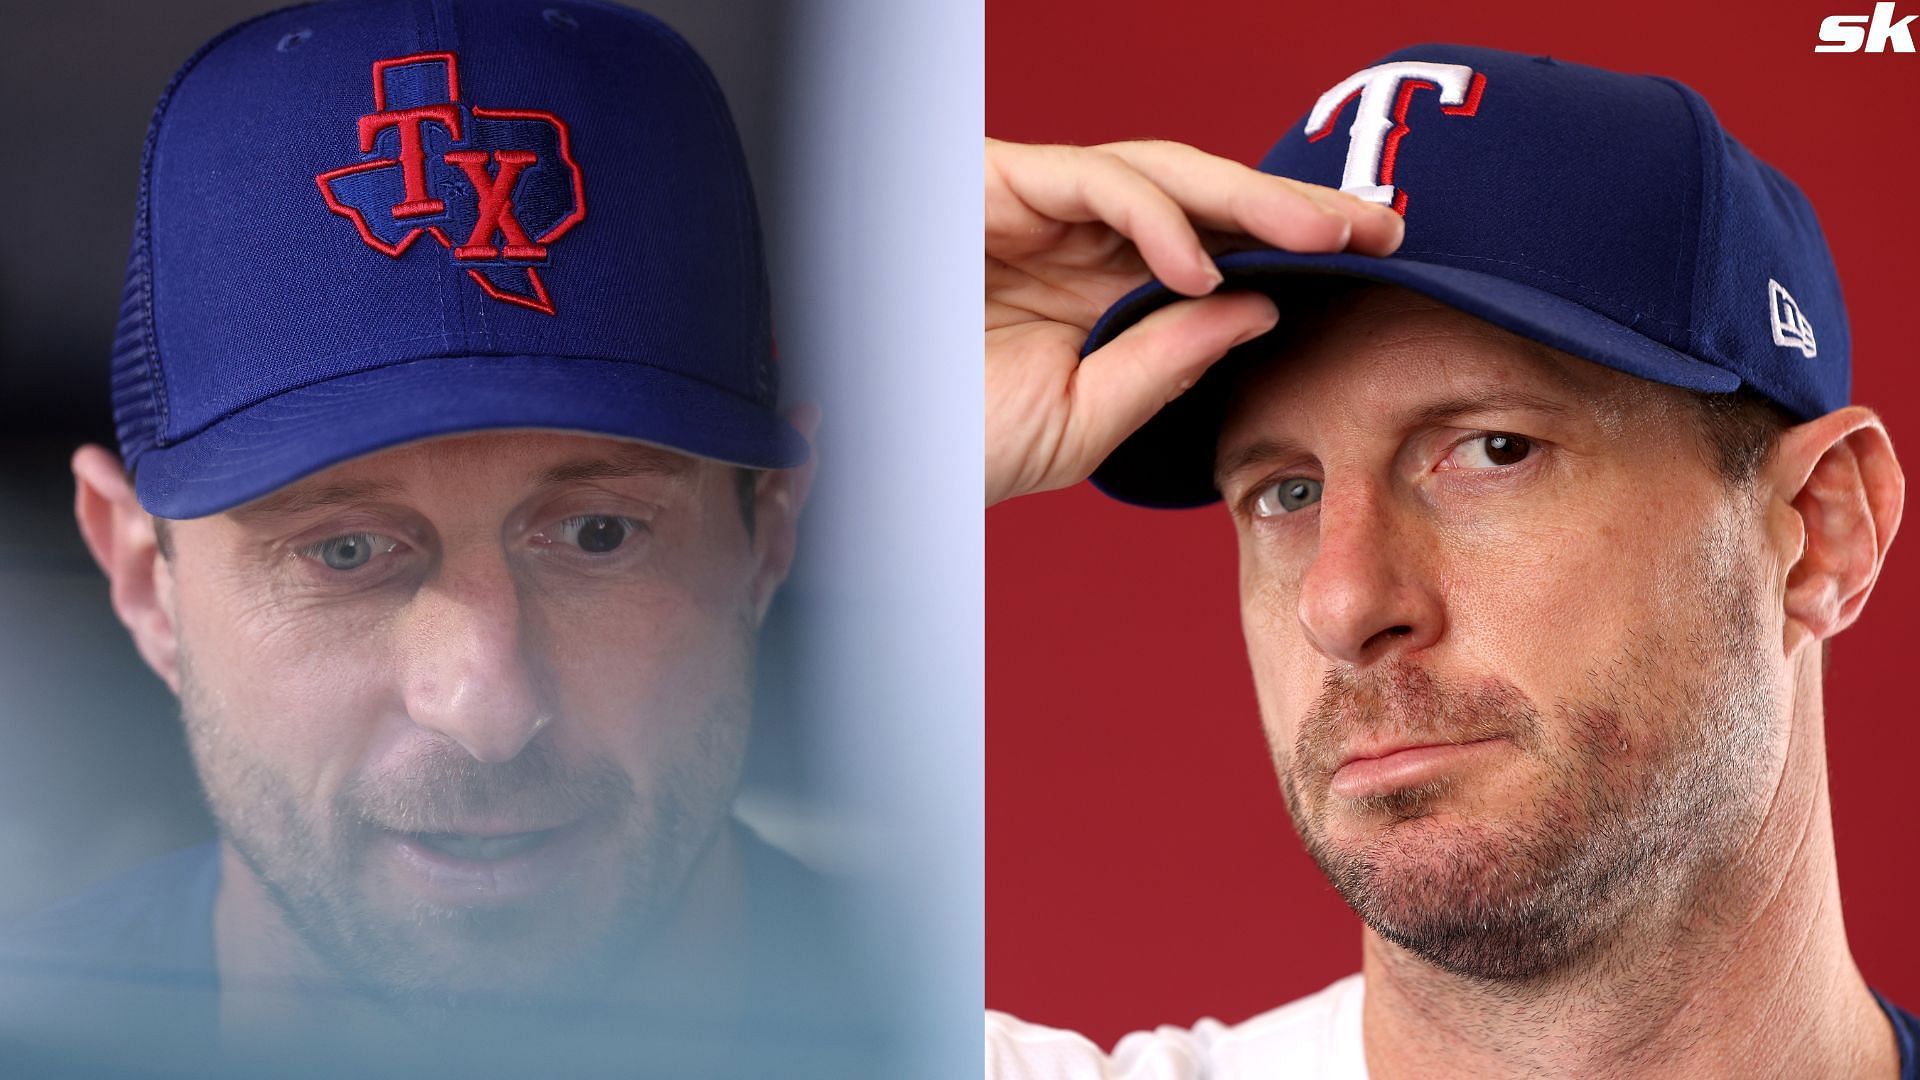 Max Scherzer of the Texas Rangers poses for a portrait during photo day at Surprise Stadium